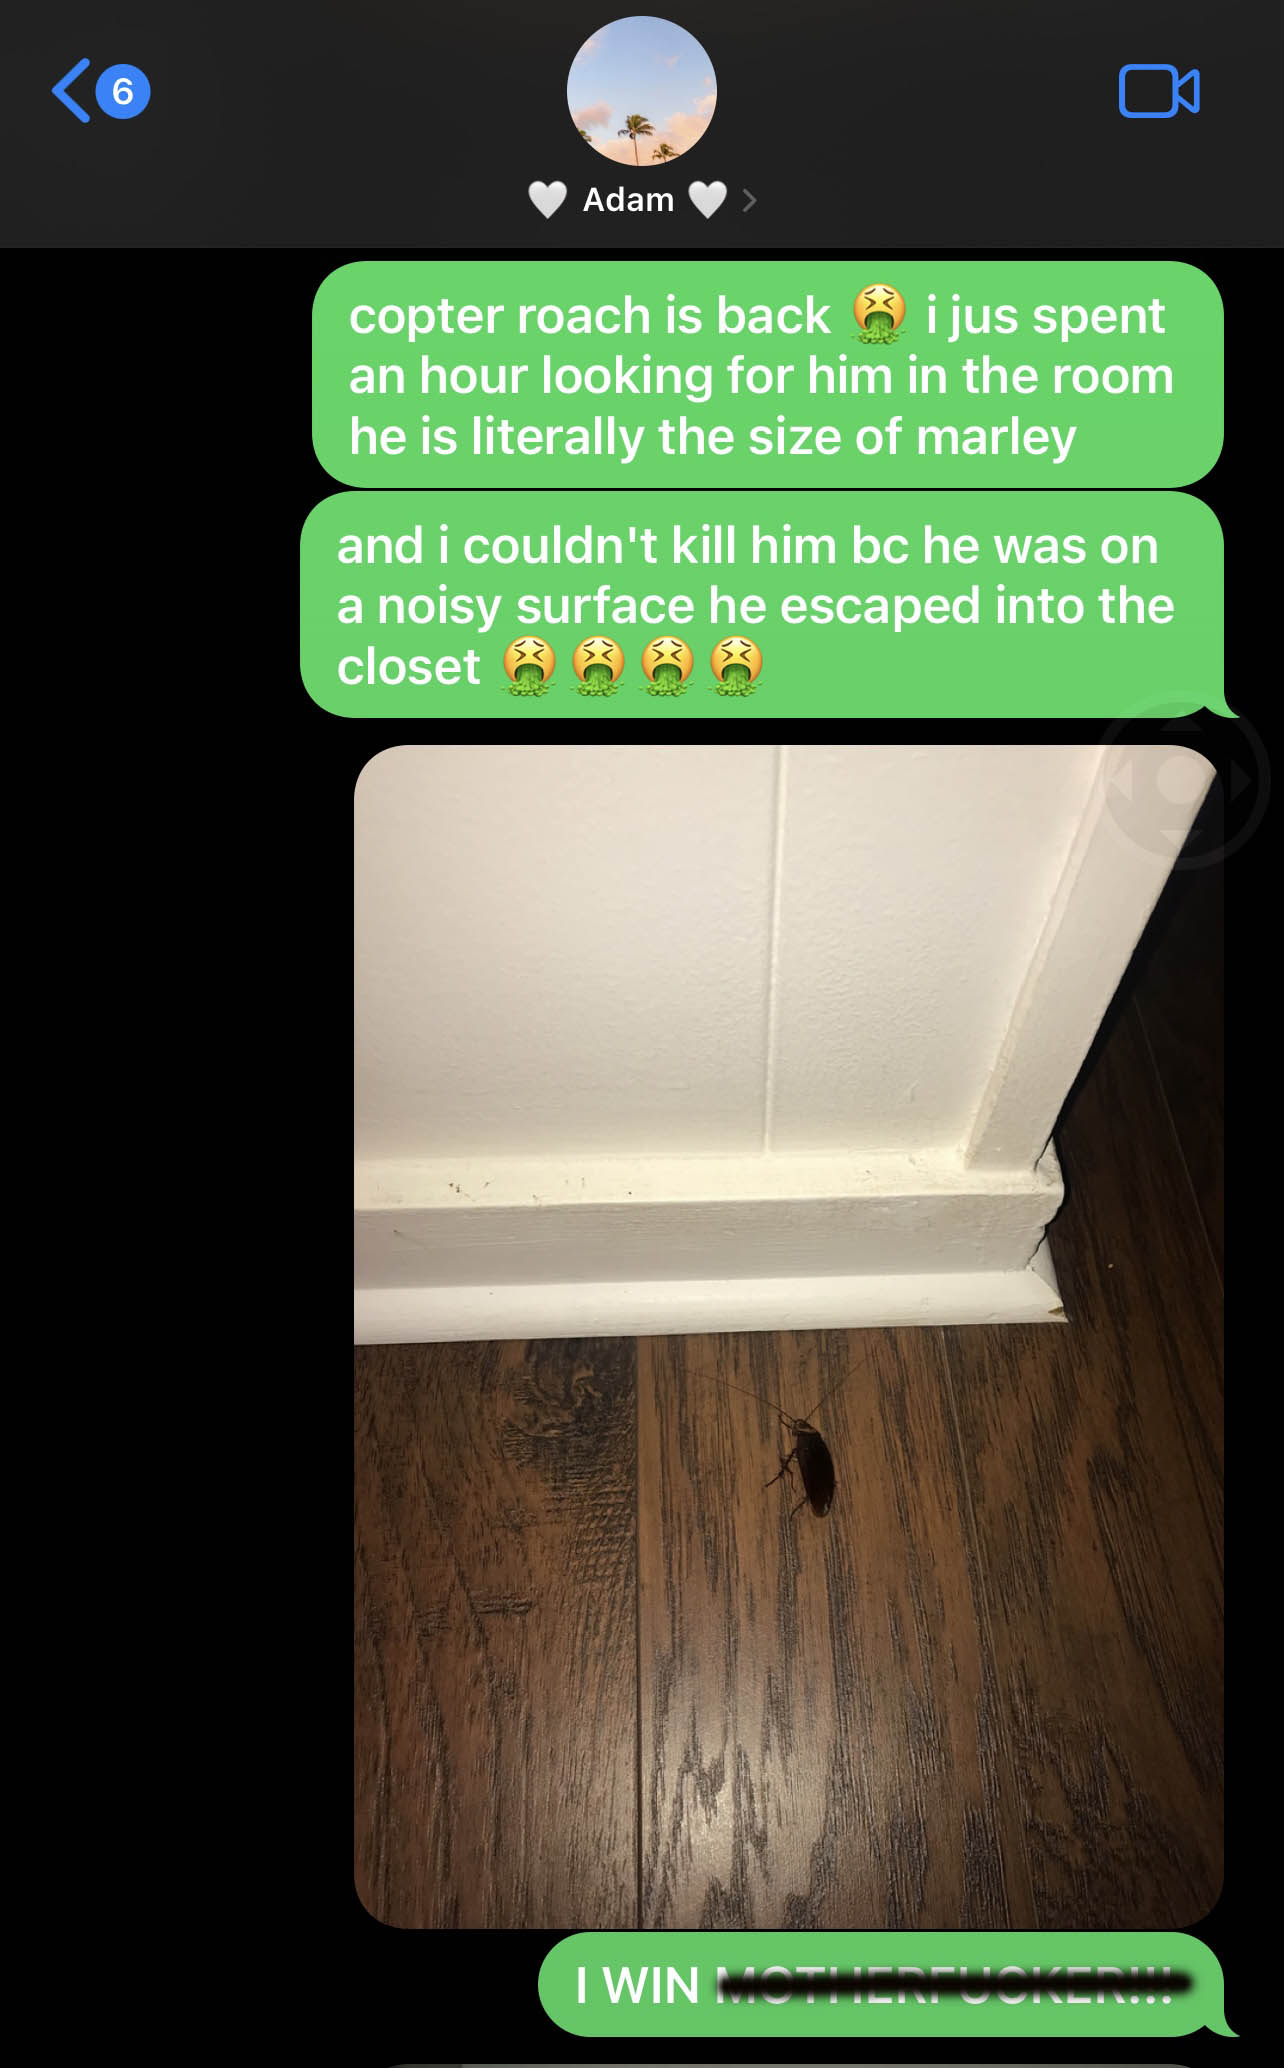 Screenshot of text message sent to husband by postpartum mother who had just killed a cockroach. Image shows cockroach dead on the floor with joyful texts from wife after its demise.